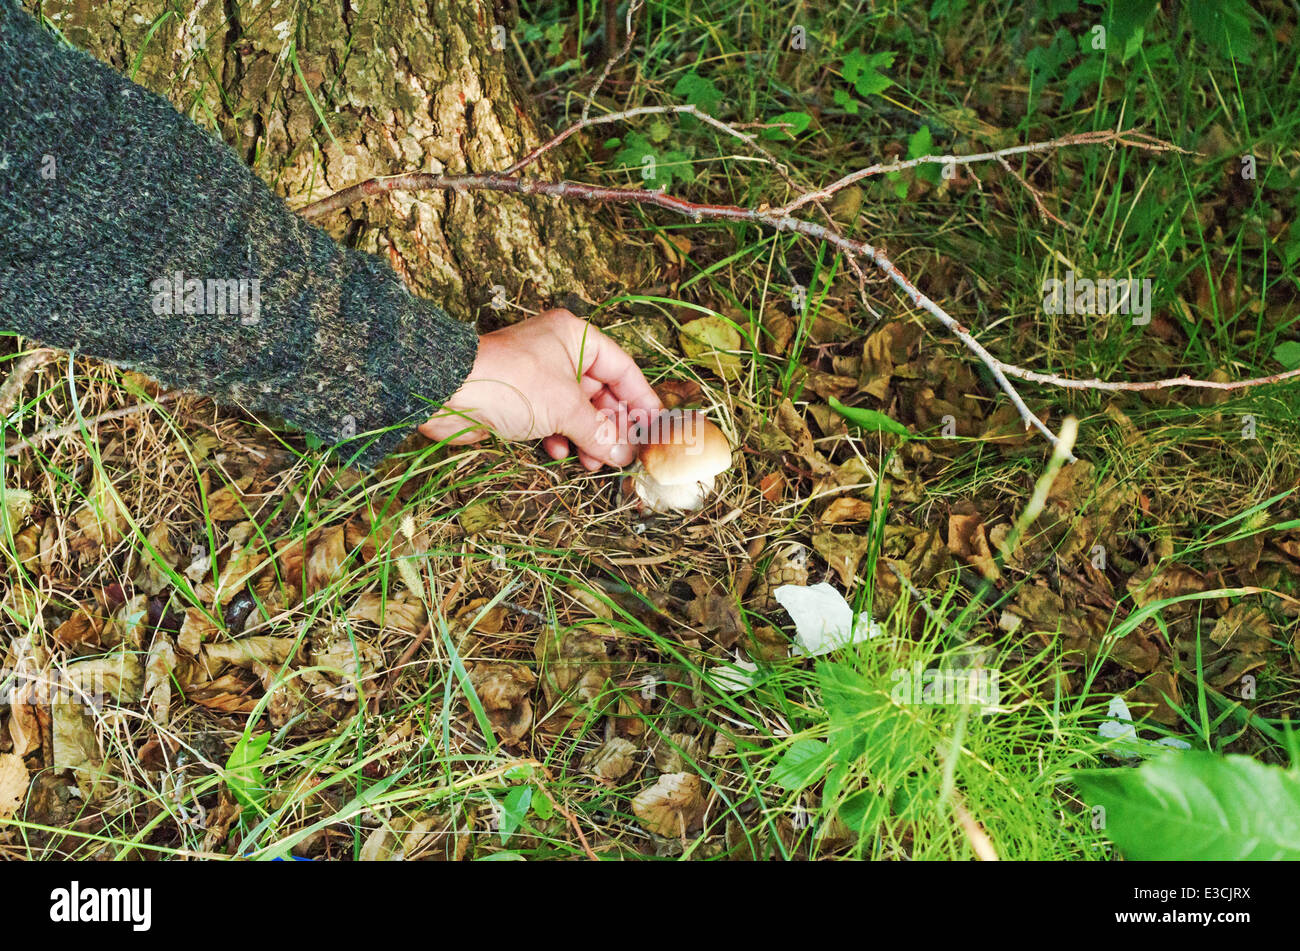 Rural lifestyle 2013. The man picks mushrooms in the wood. Stock Photo